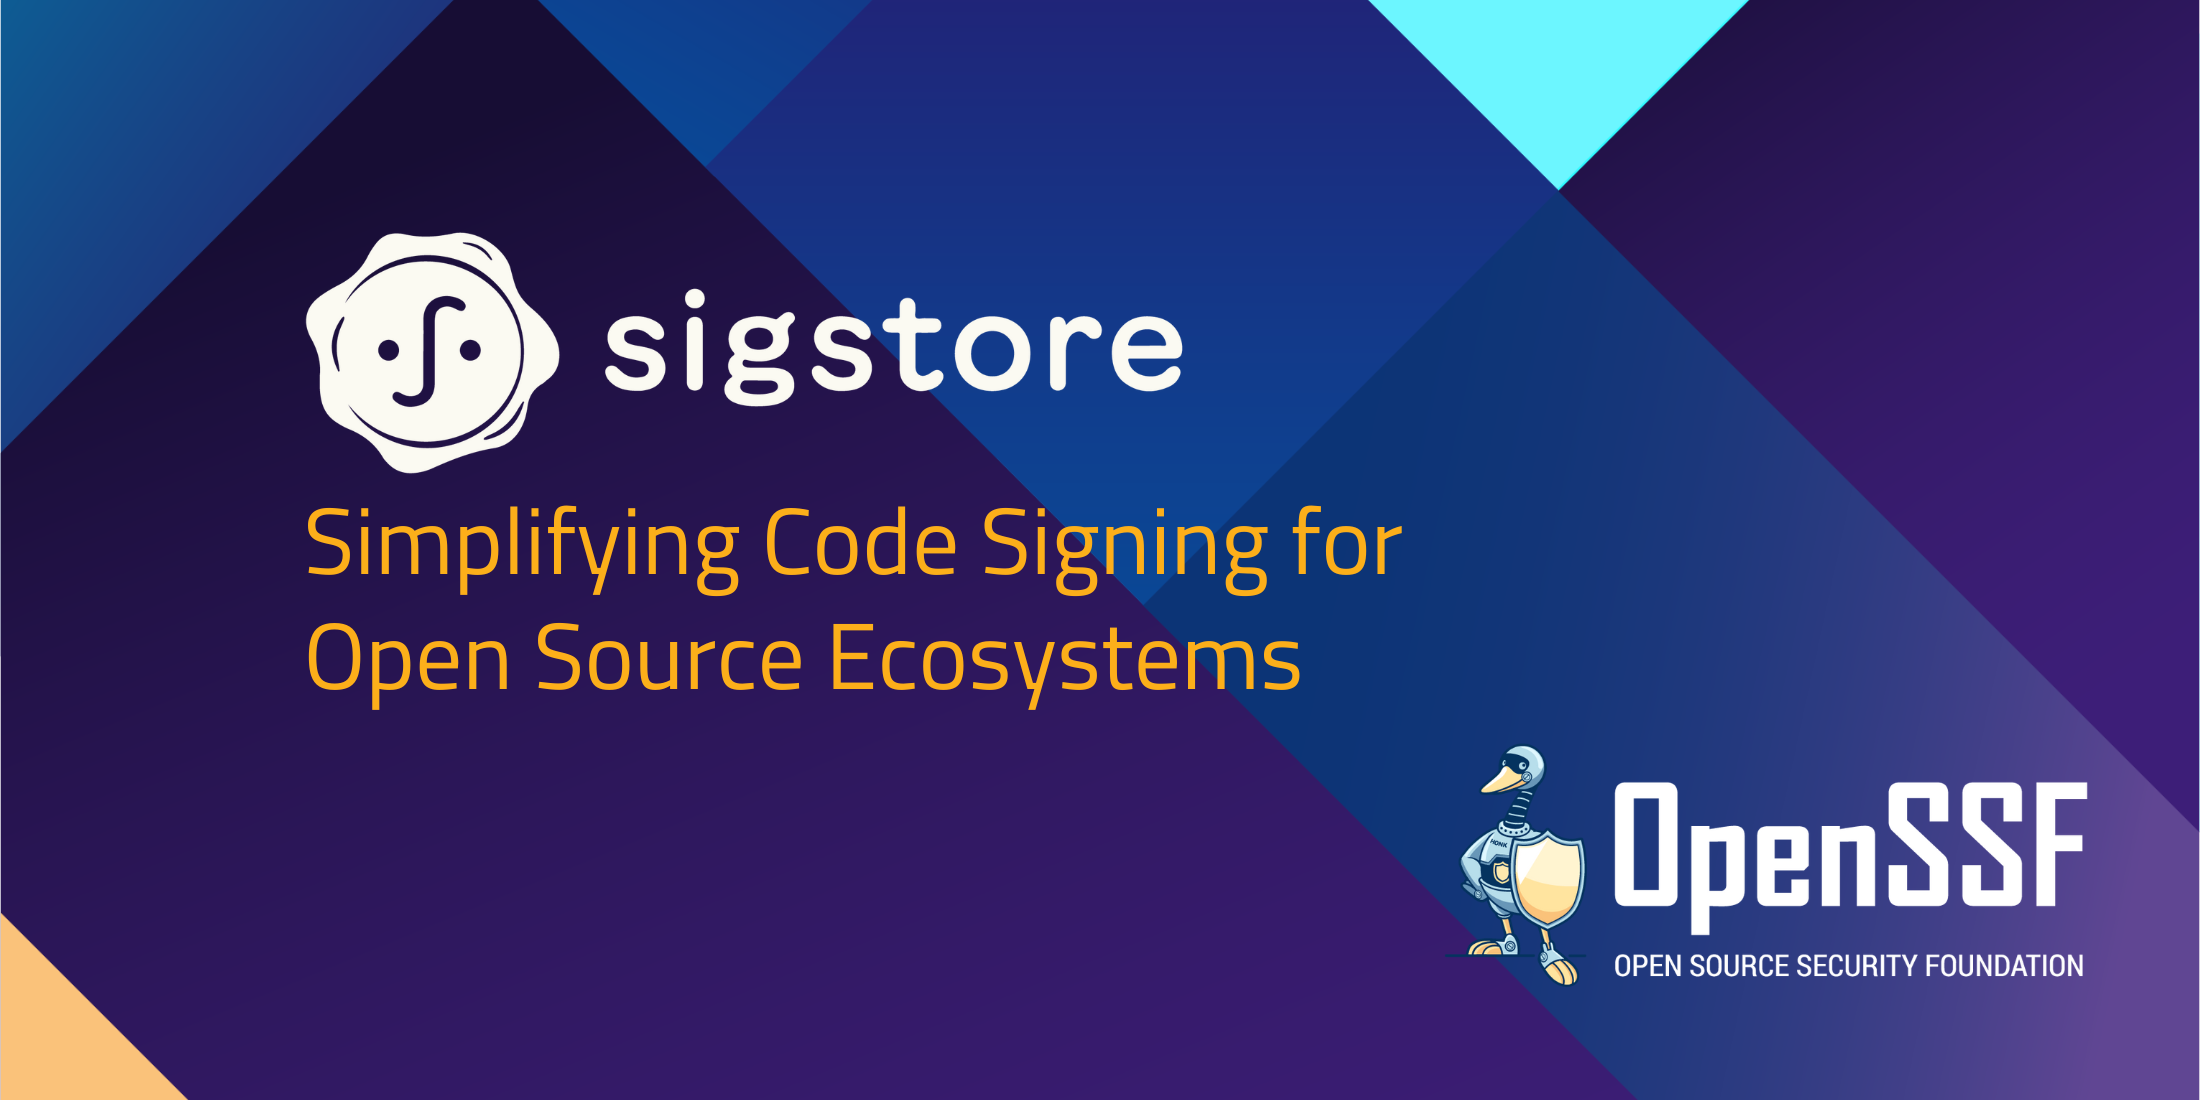 OpenSSF Sigstore Simplifying Code Signing for Open Source Ecosystems